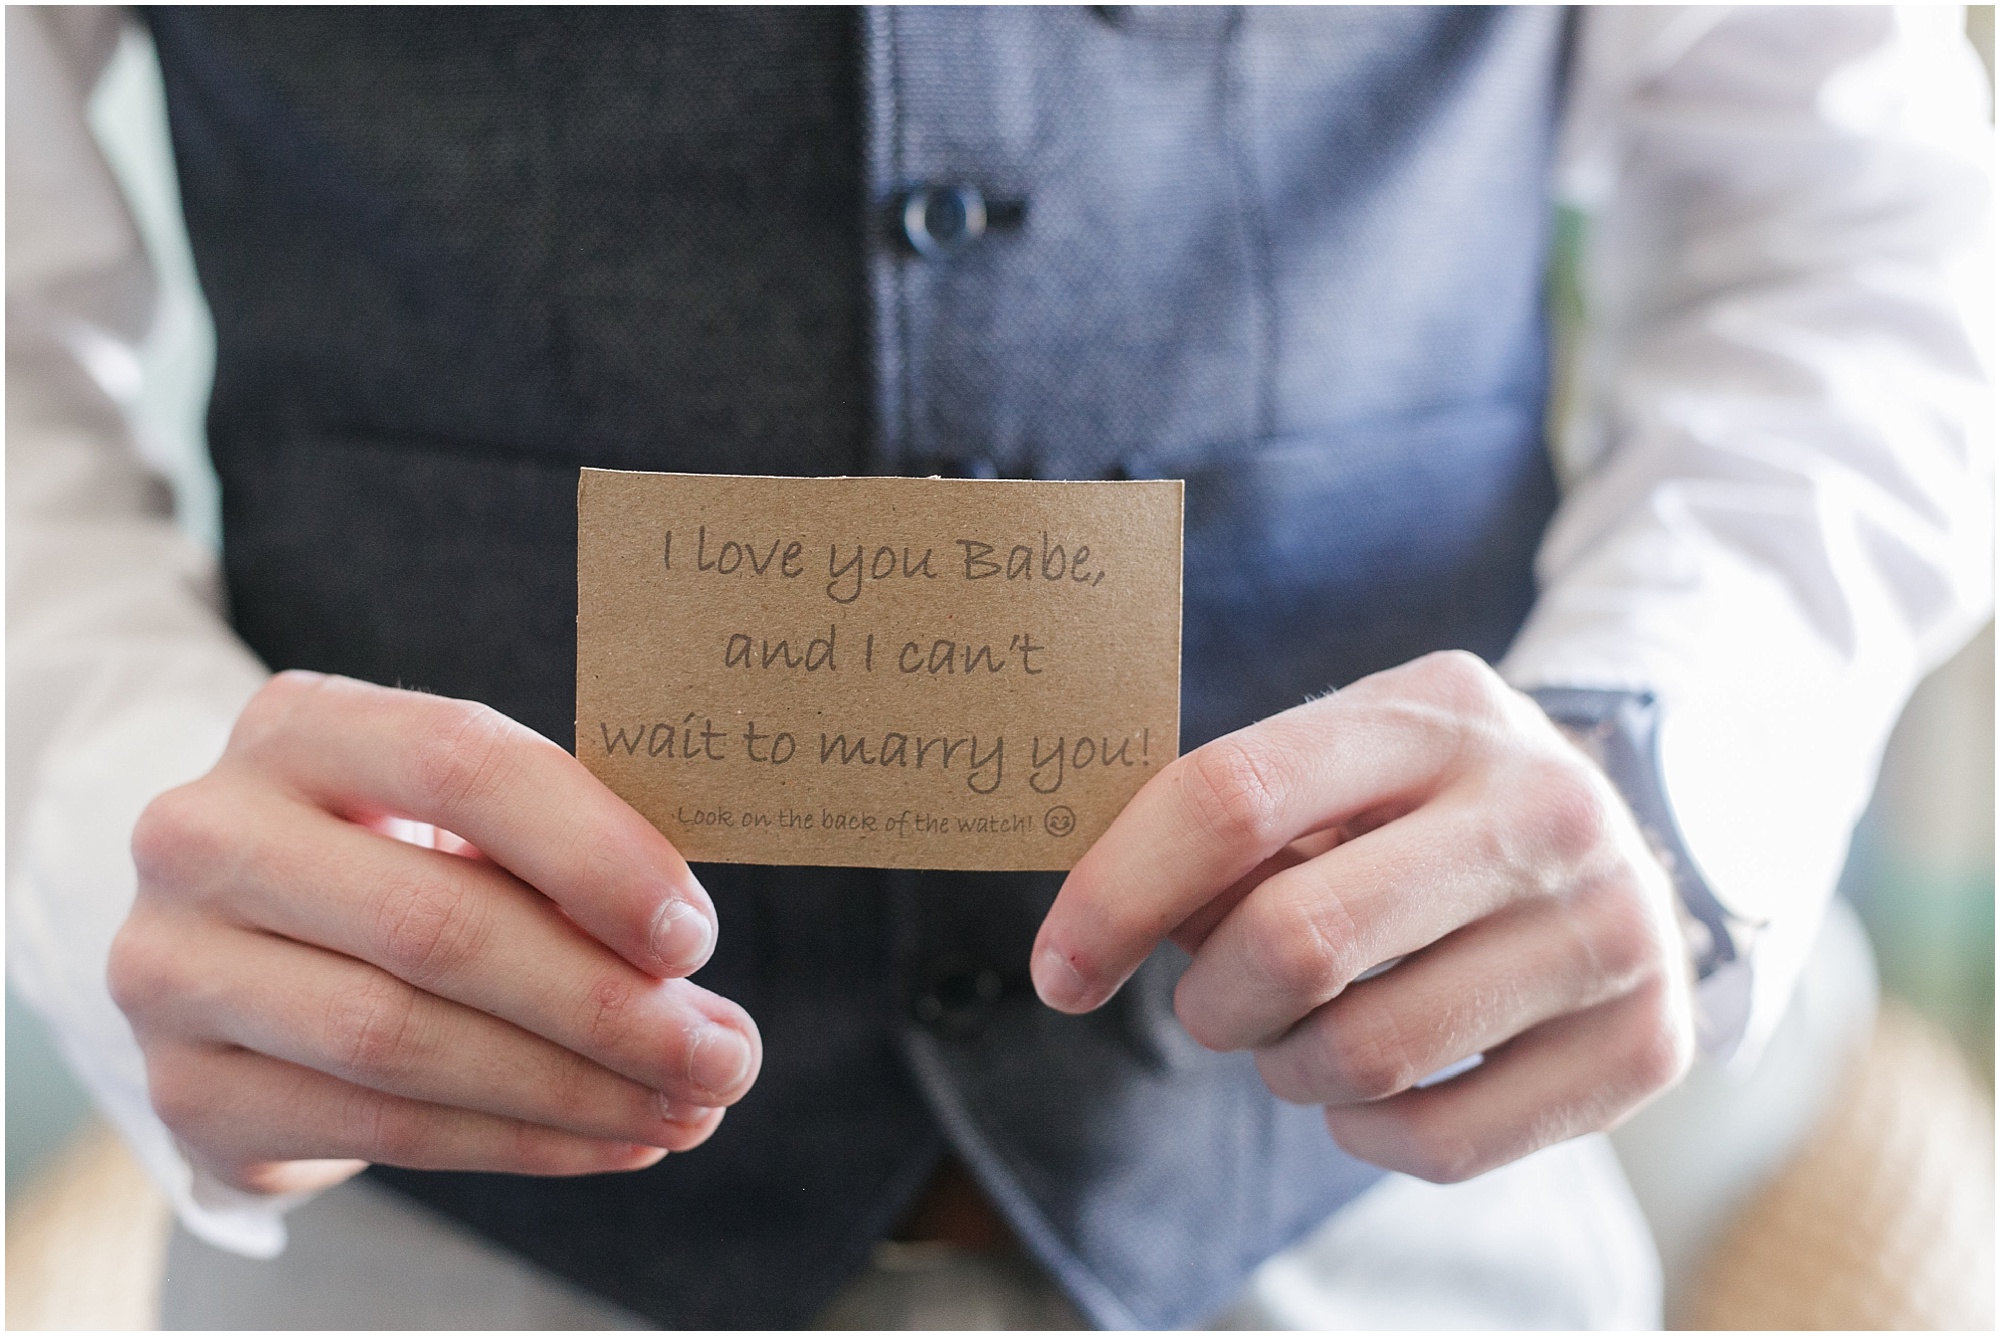 Love note from the bride to the groom